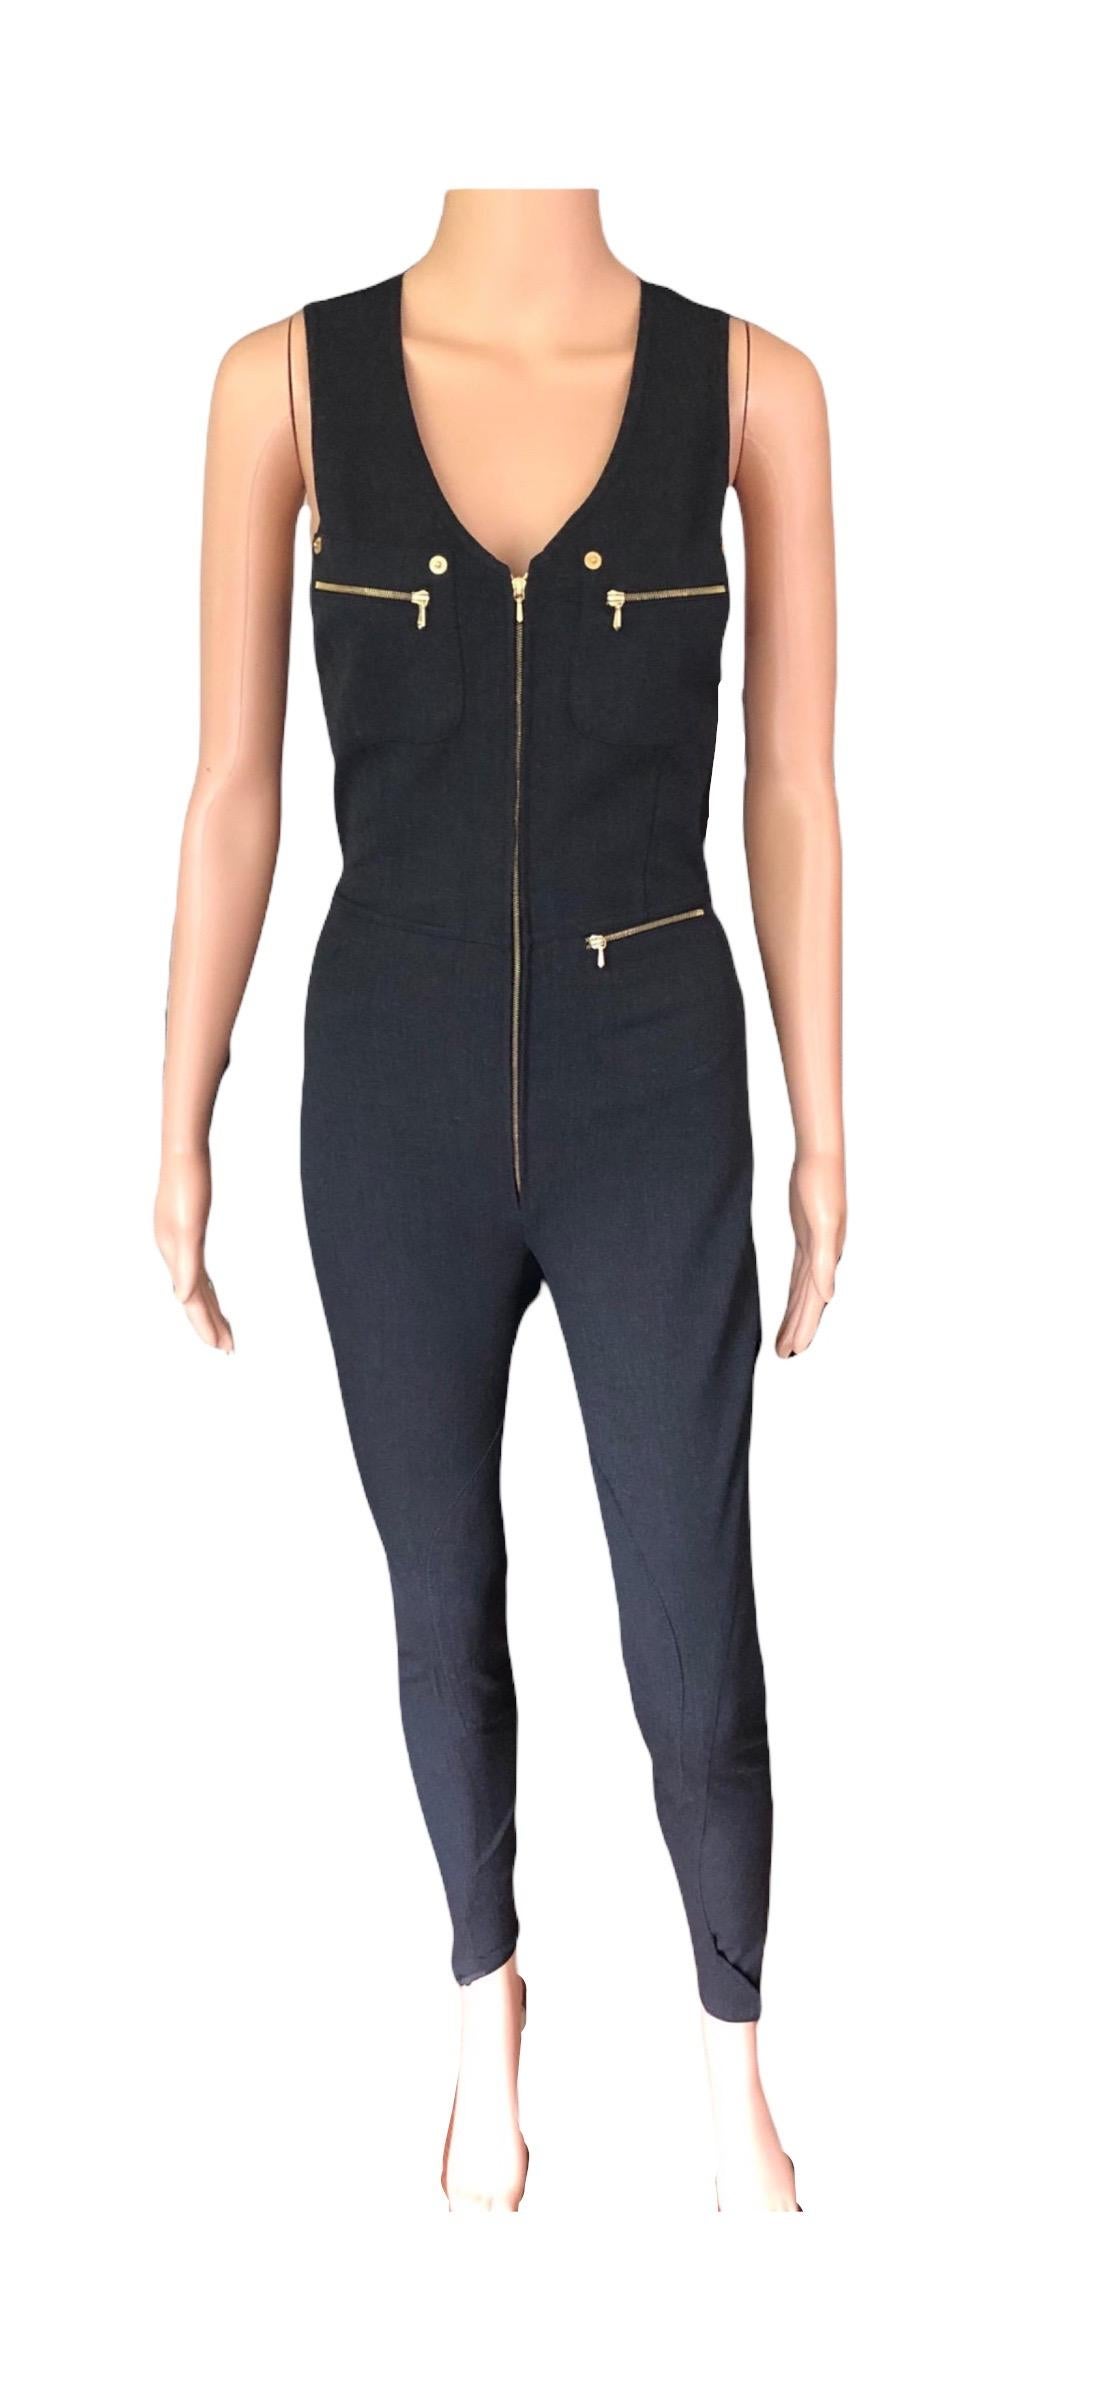 Tom Ford for Gucci S/S 1993 Runway Vintage Zipper Jumpsuit For Sale 4